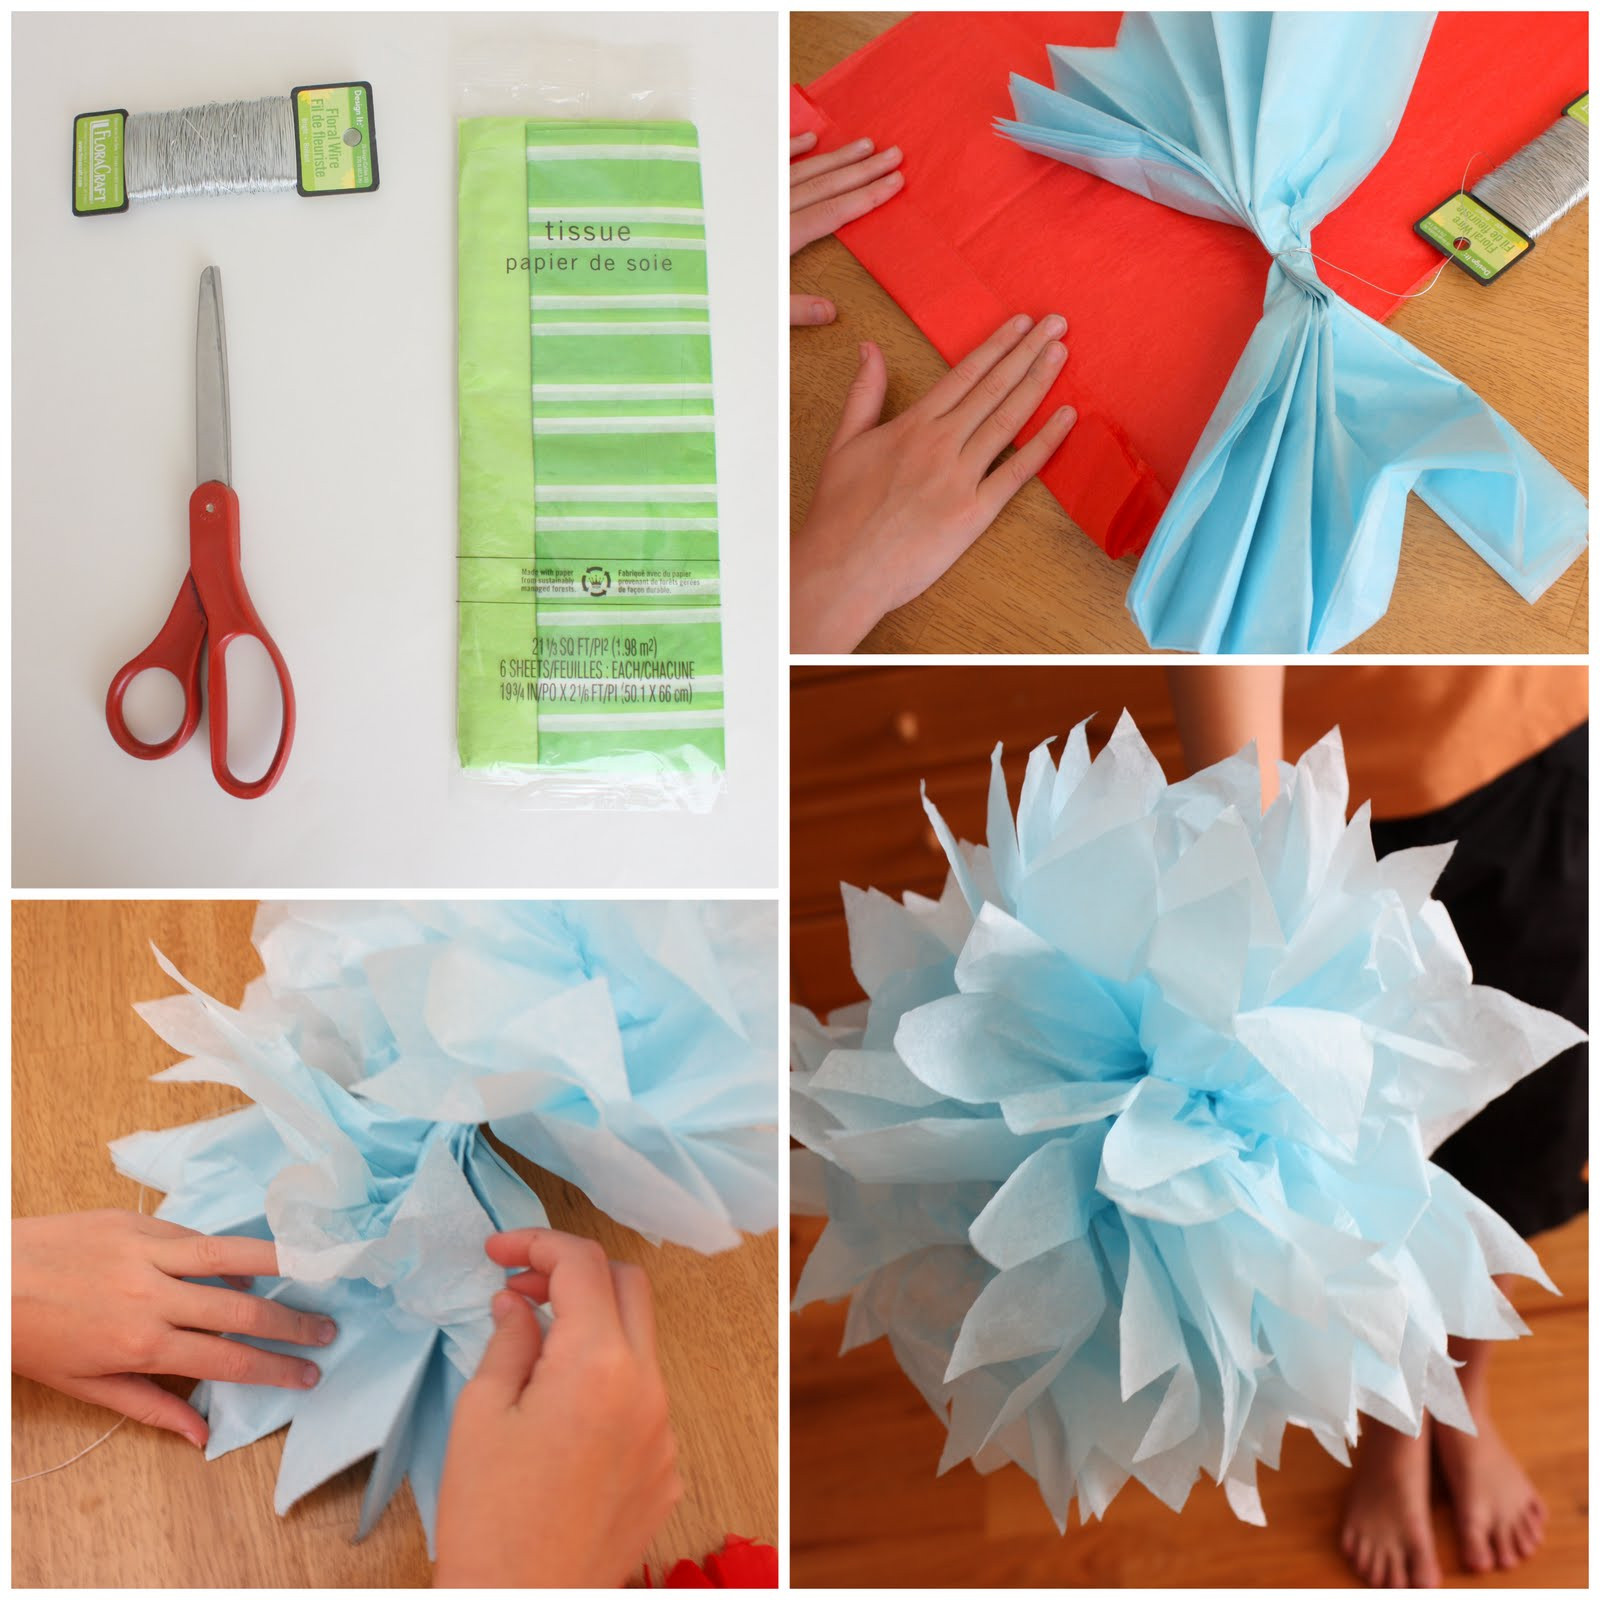 Paper Crafting Ideas For Adults
 Tissue Paper Crafts For Adults Paper Crafts Ideas for Kids